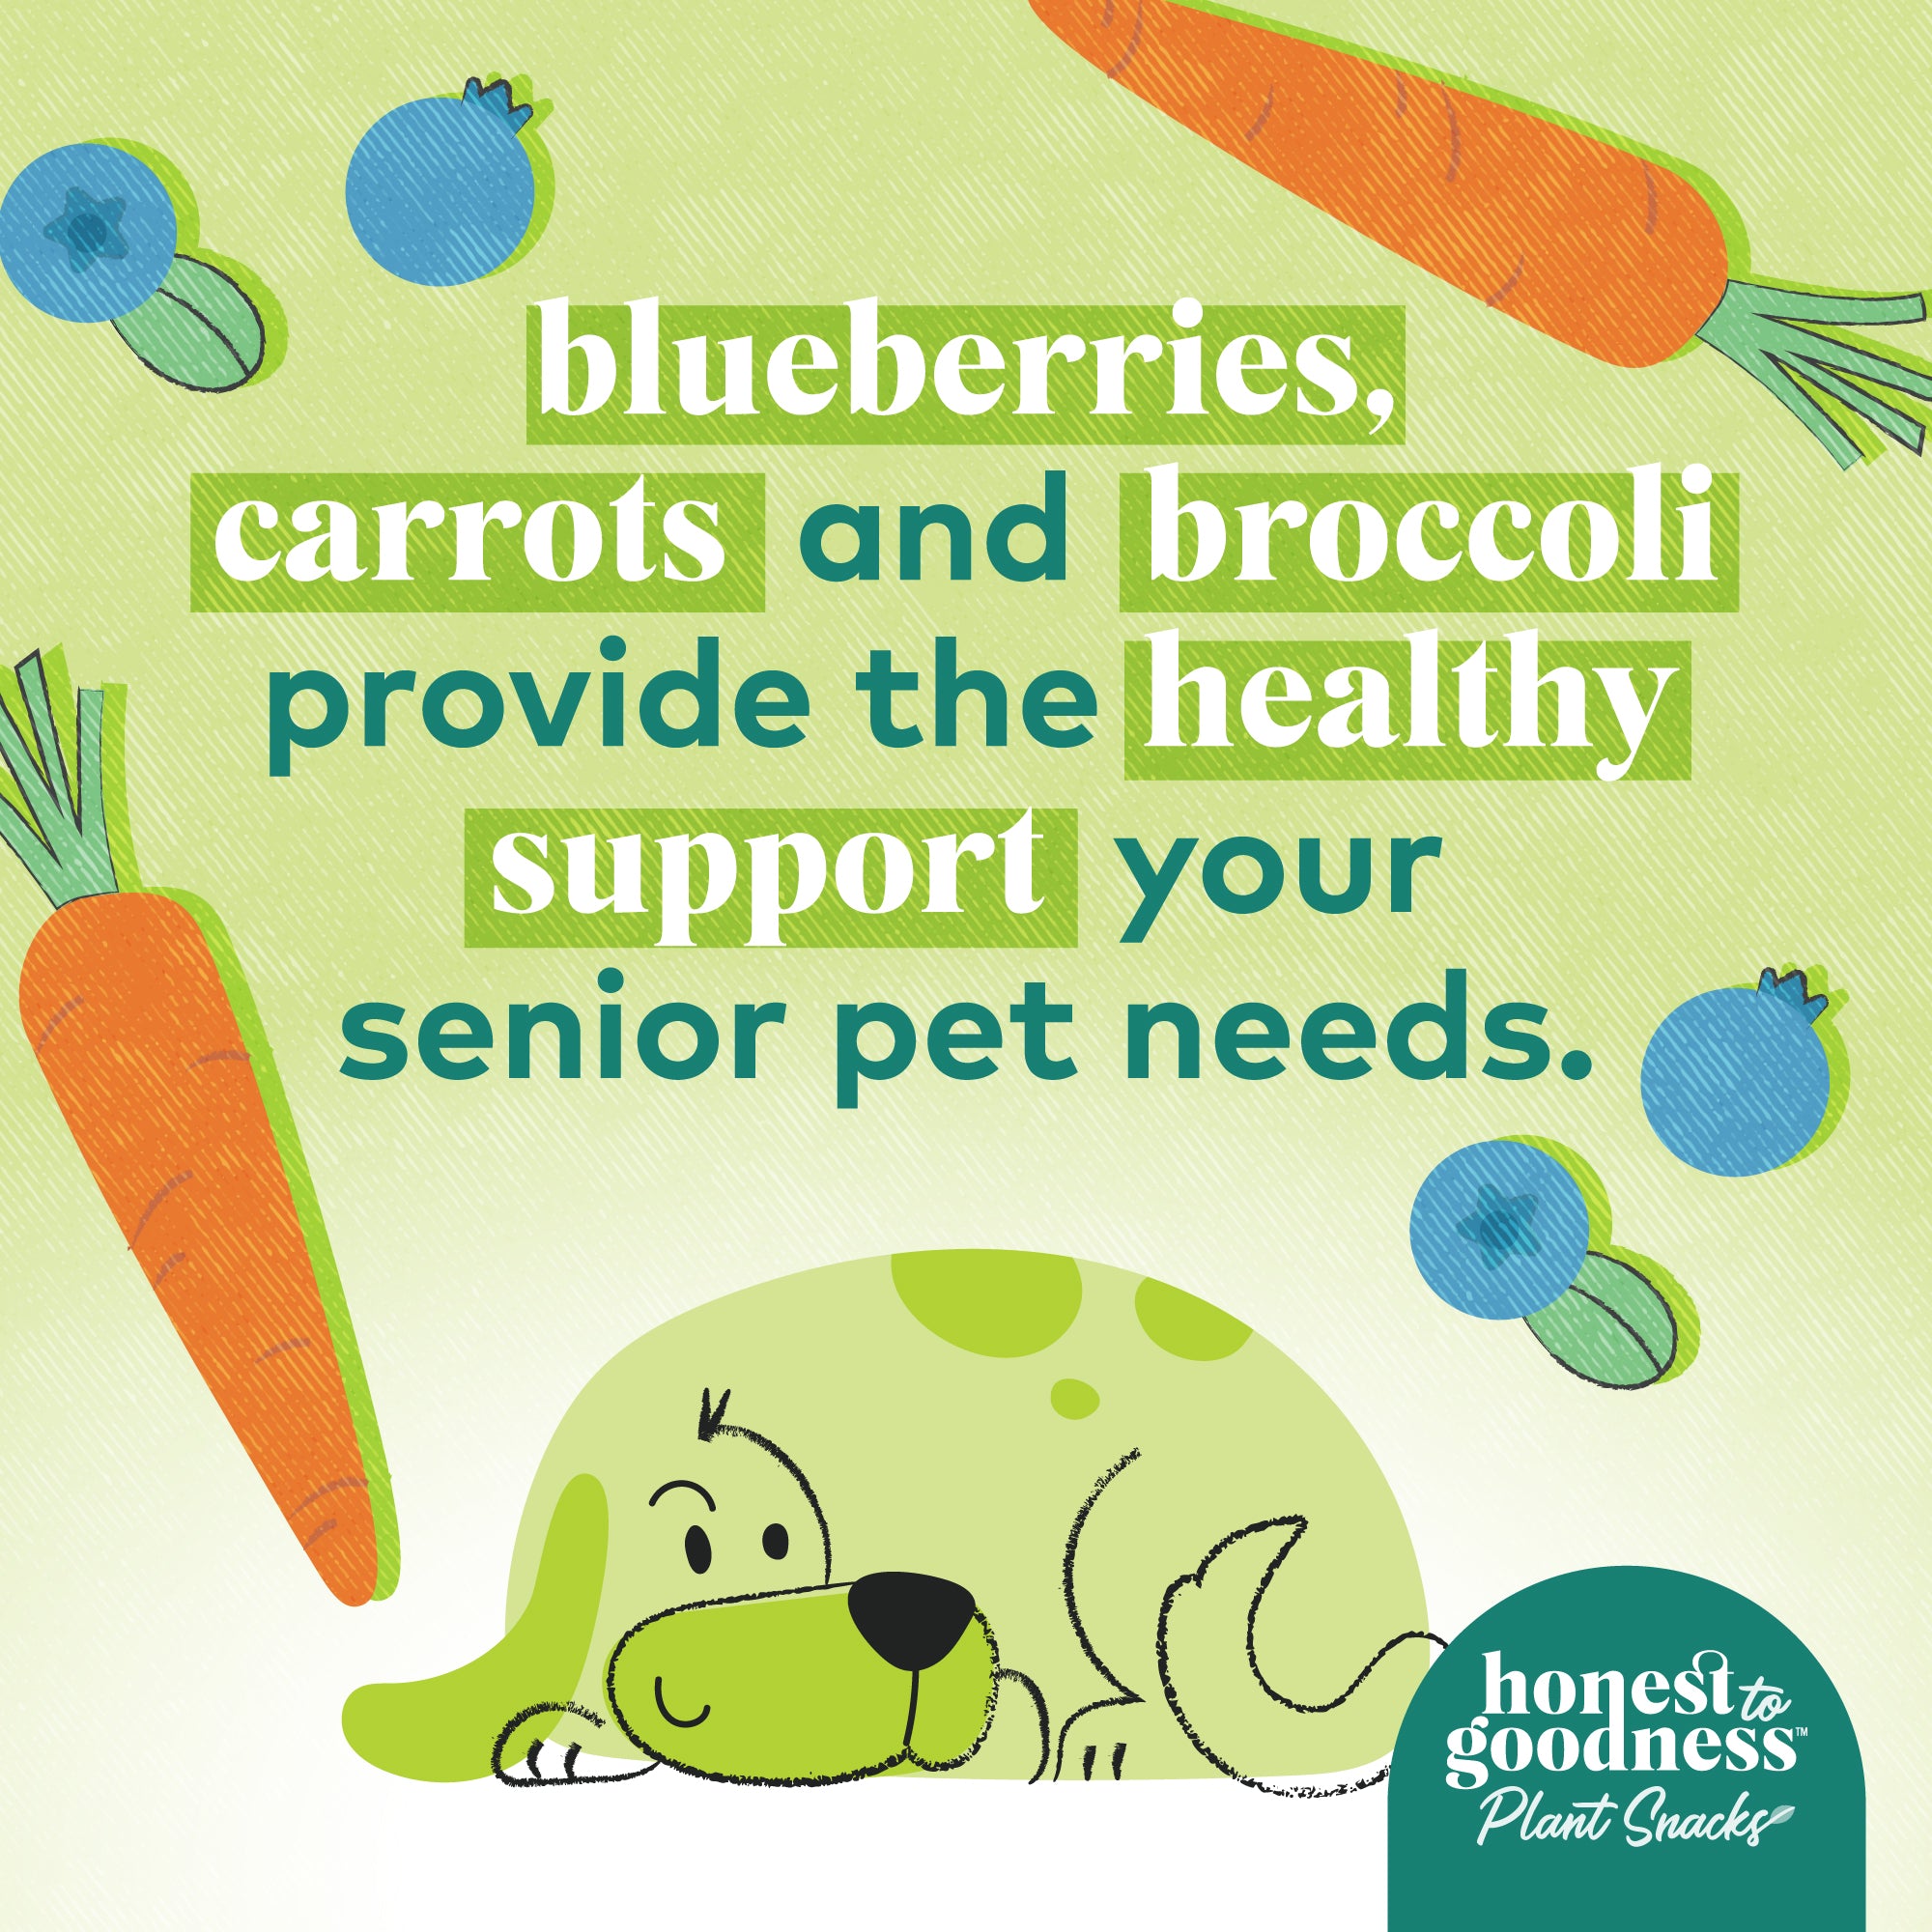 Blueberries, carrots and broccoli provide the healthy support your senior pet needs.  Honest to Goodness plant snacks for dogs.